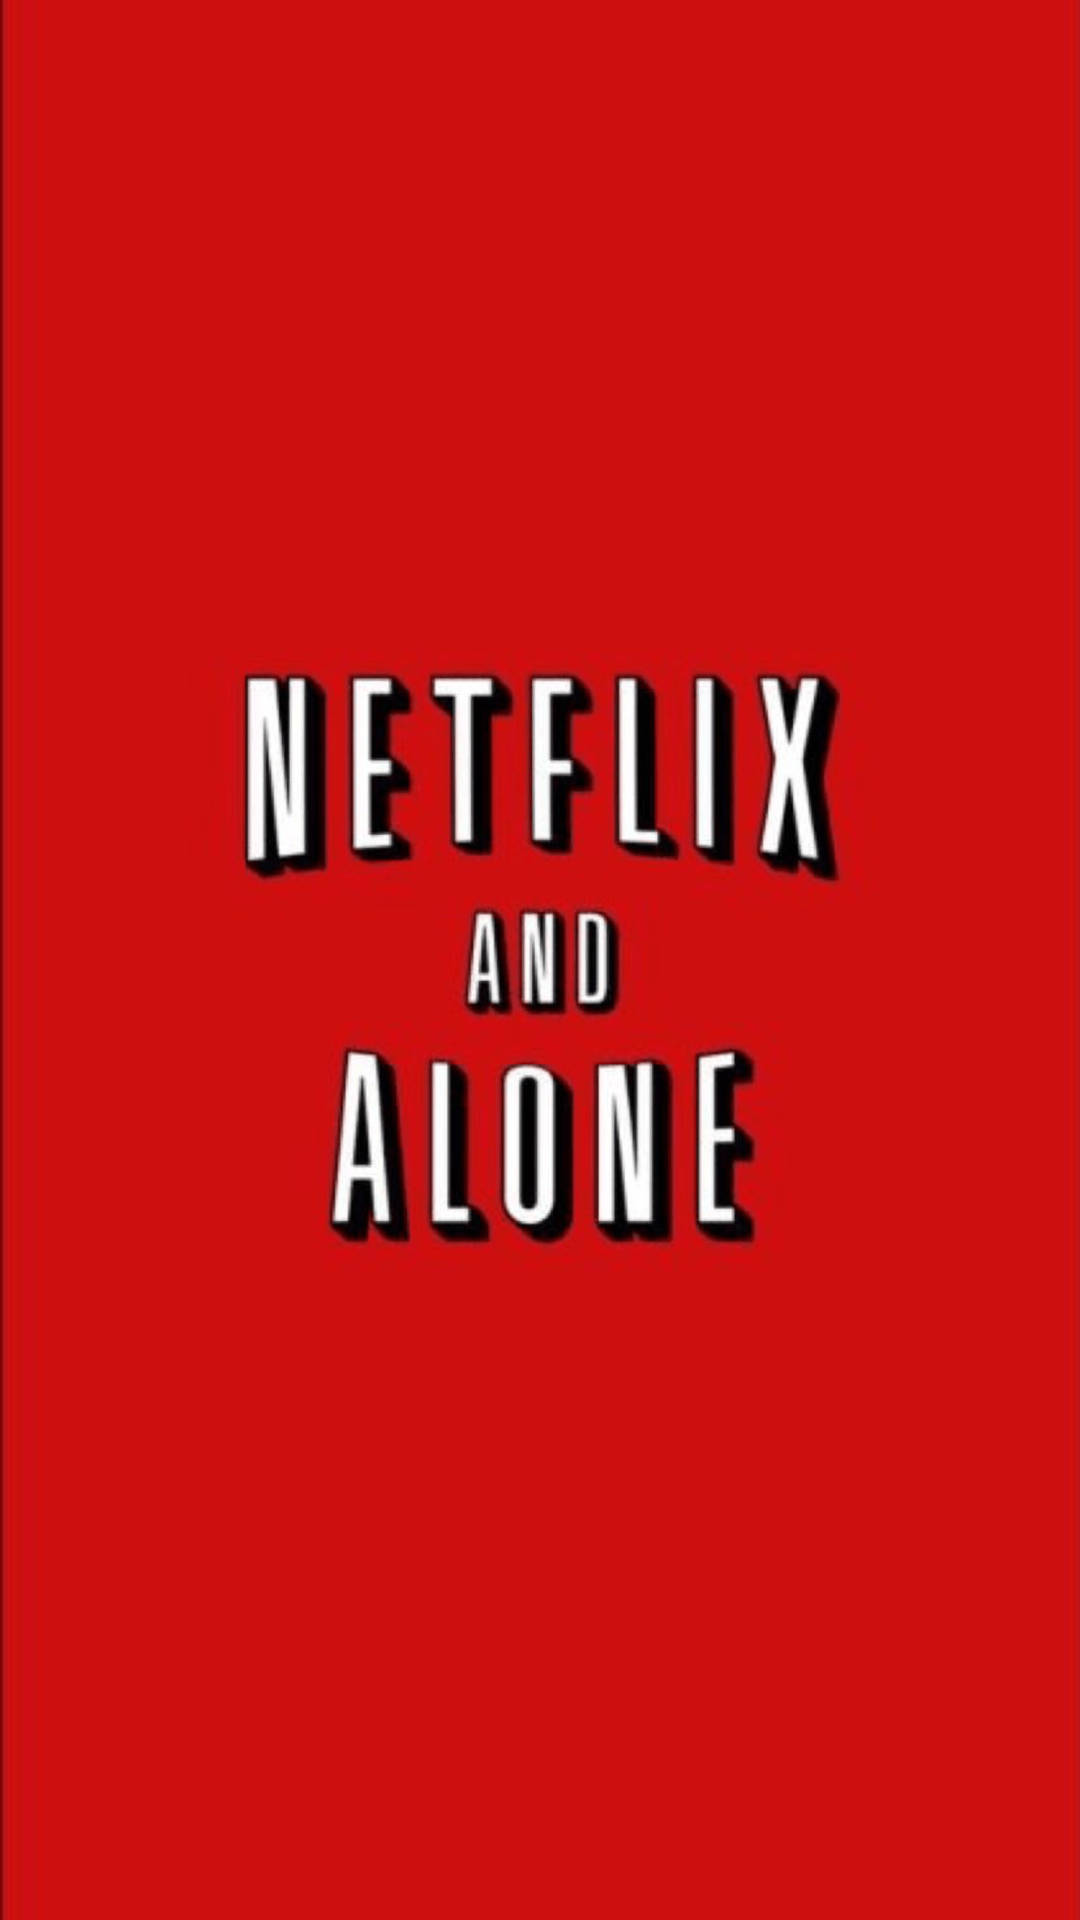 Netflix 1242X2208 Wallpaper and Background Image